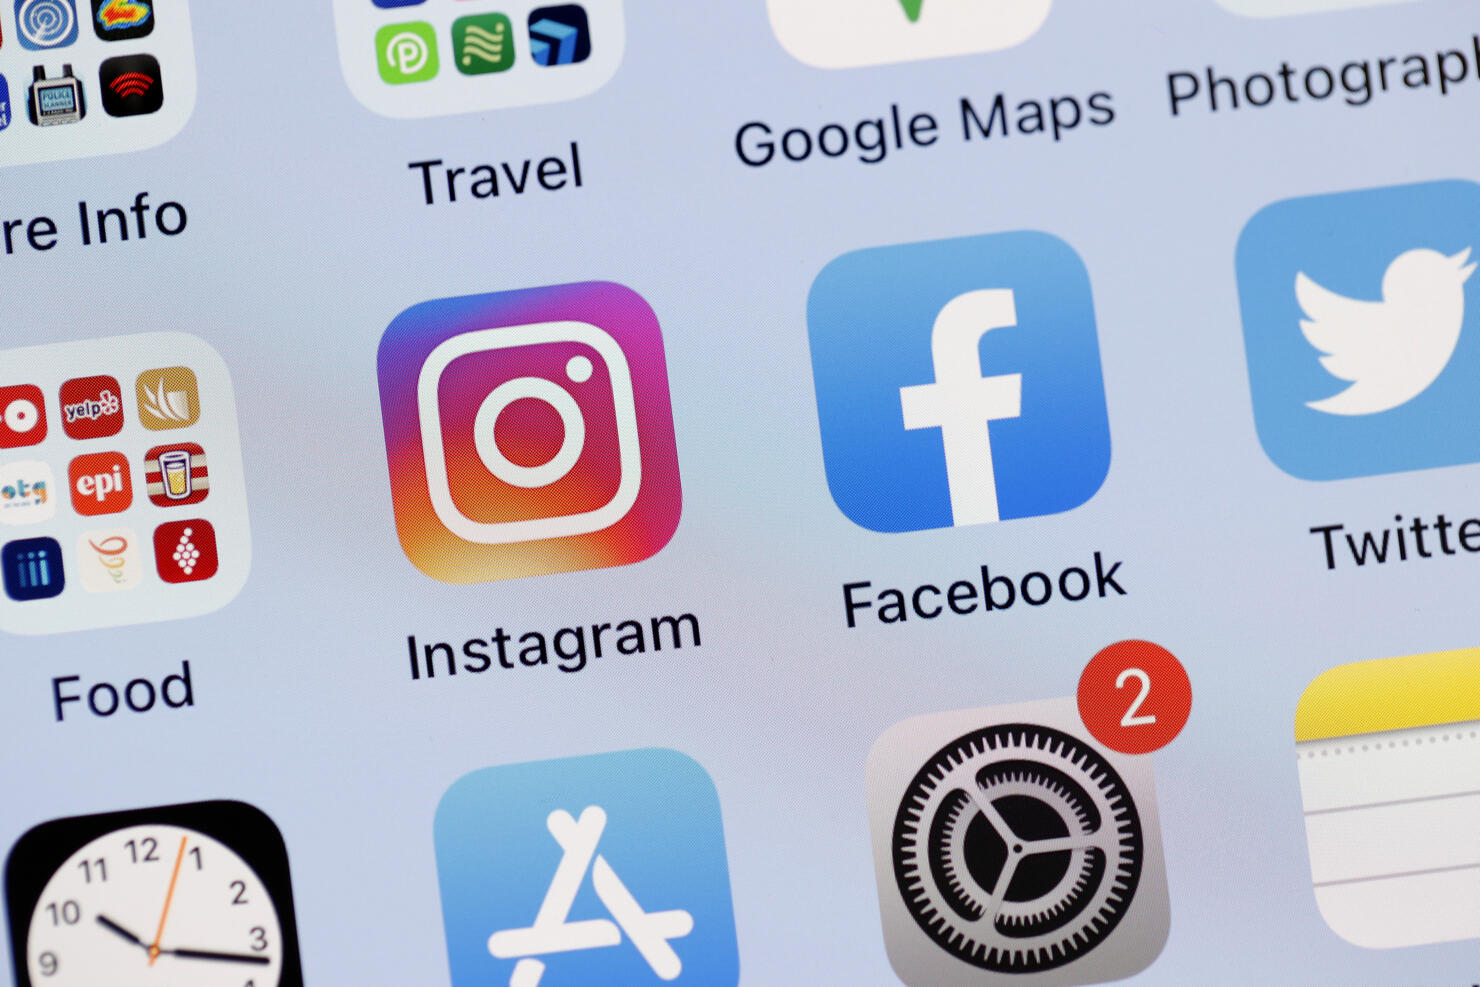 Facebook,Instagram And WhatsApp Experience Global Outage